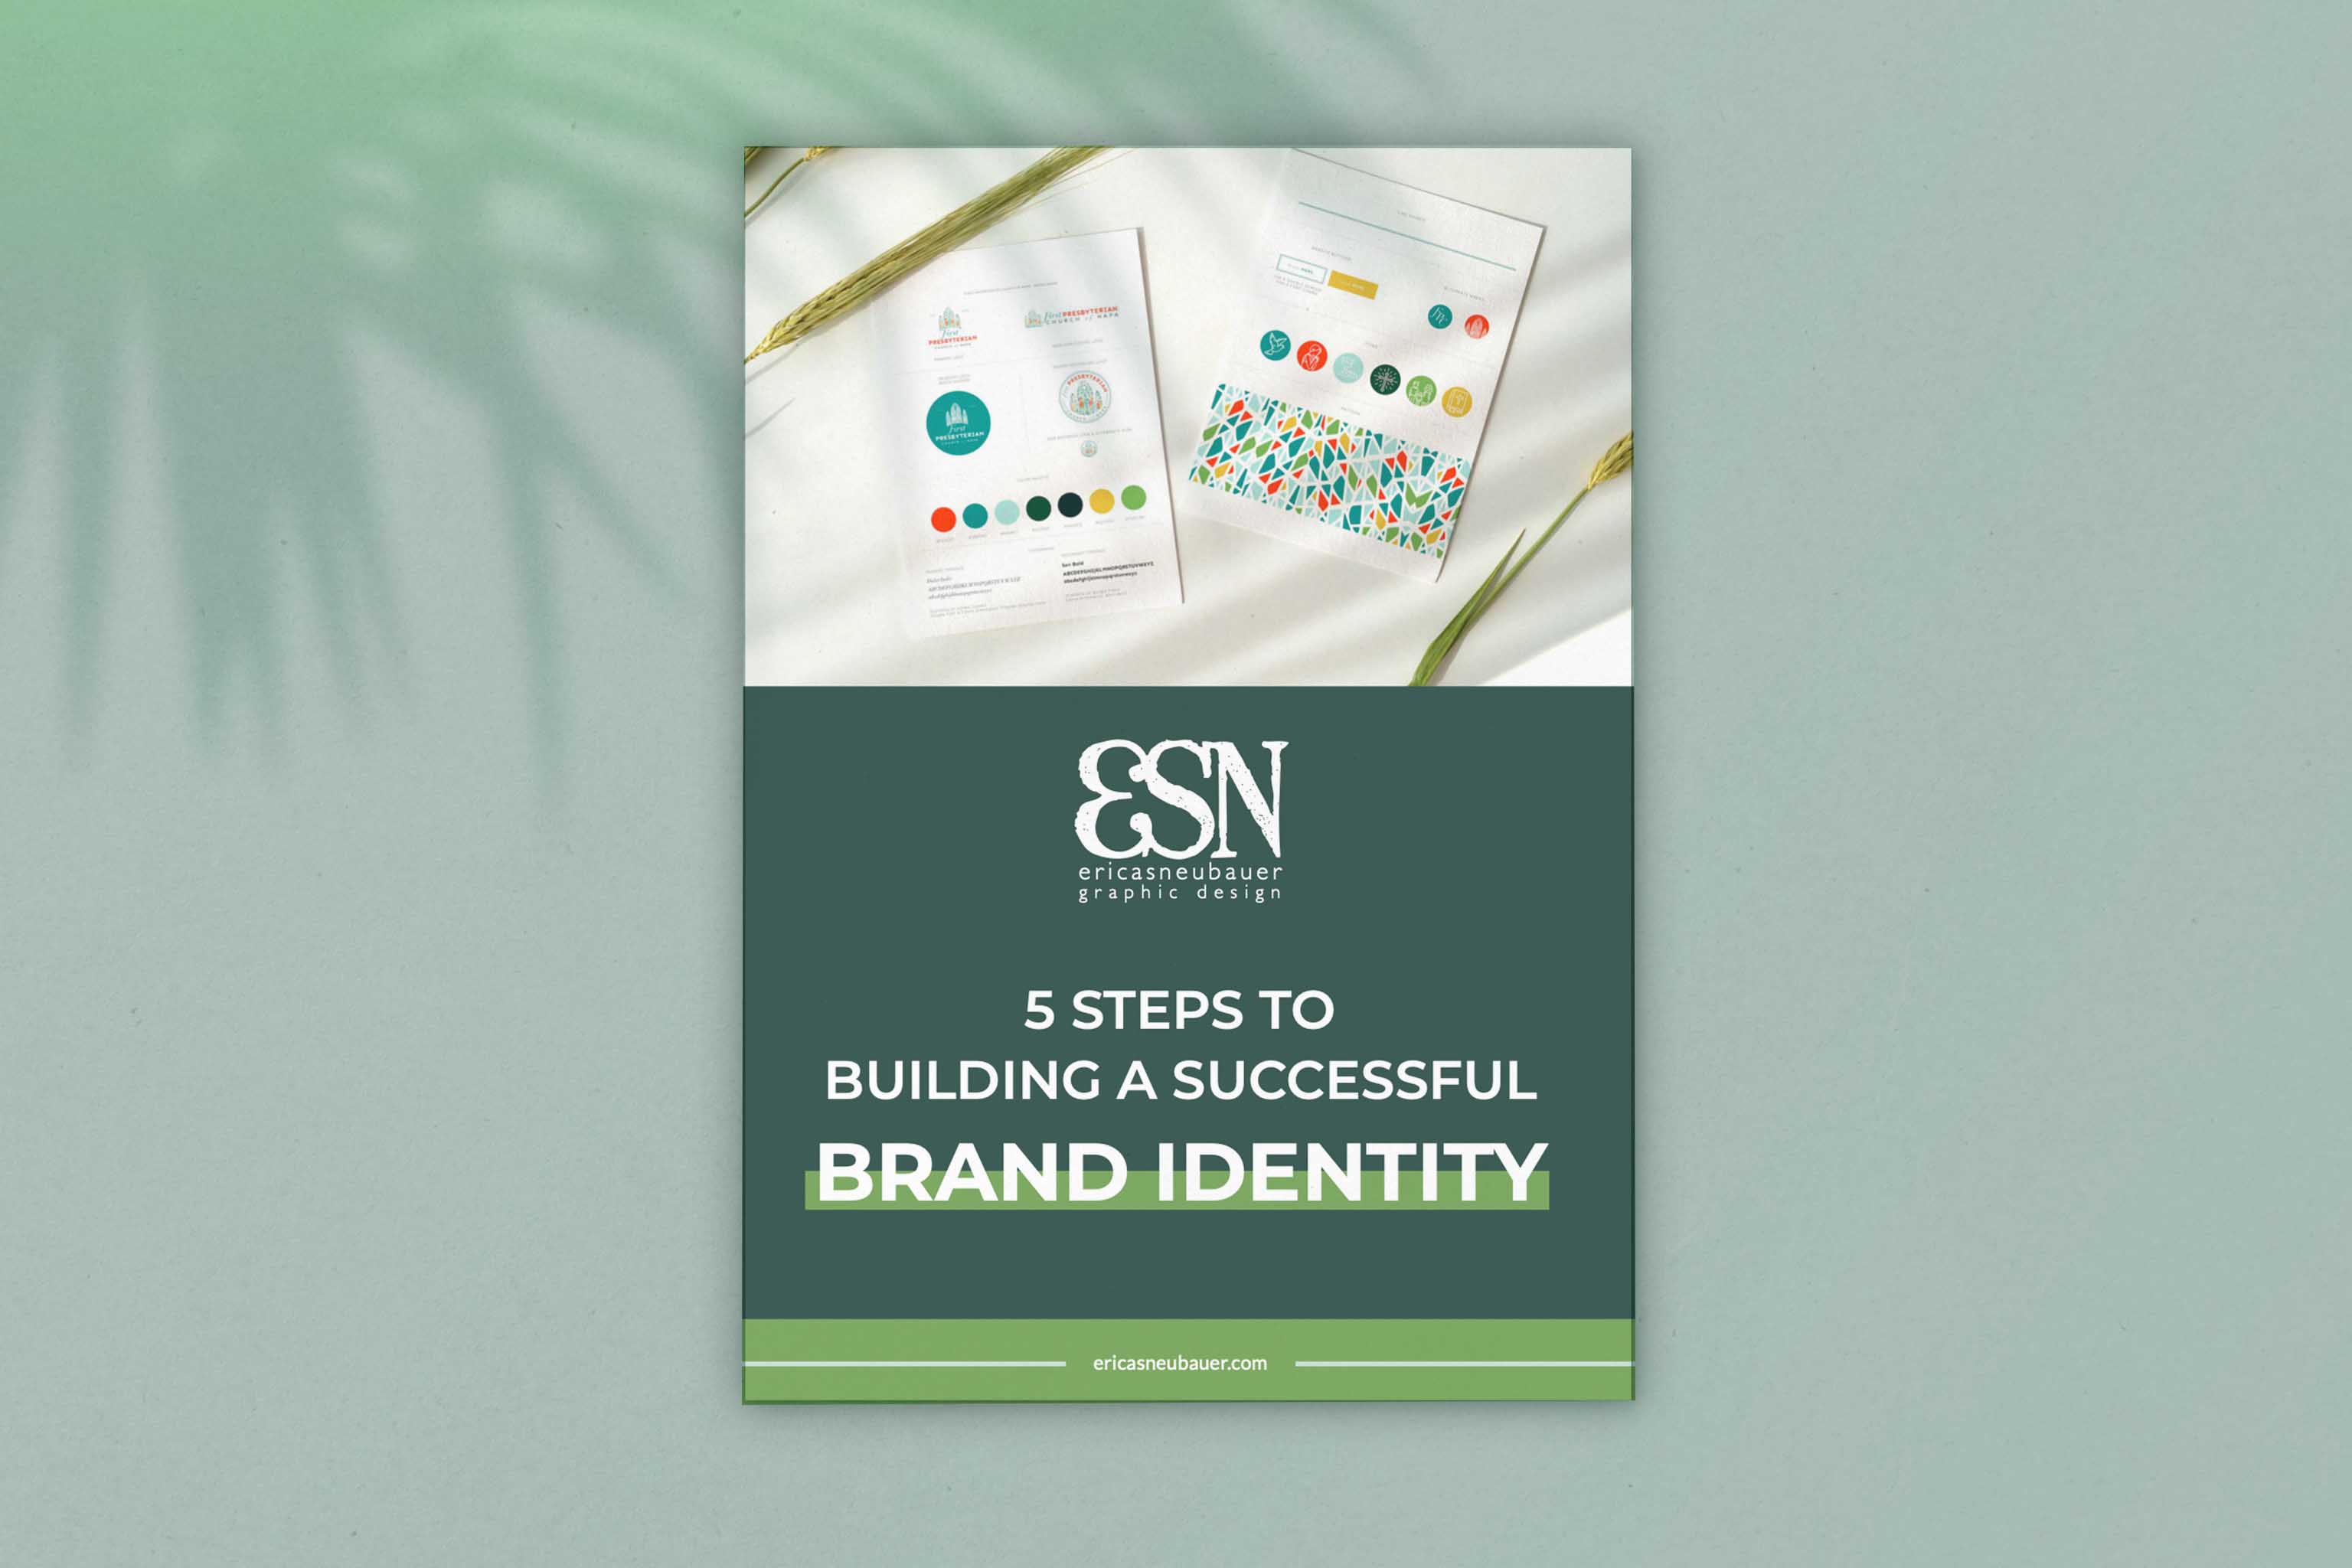 a multi-page document titled "5 steps to building a successful brand identity" and featuring a logo design shows against a isolated aqua background with the shadow of a palm tree overlaid